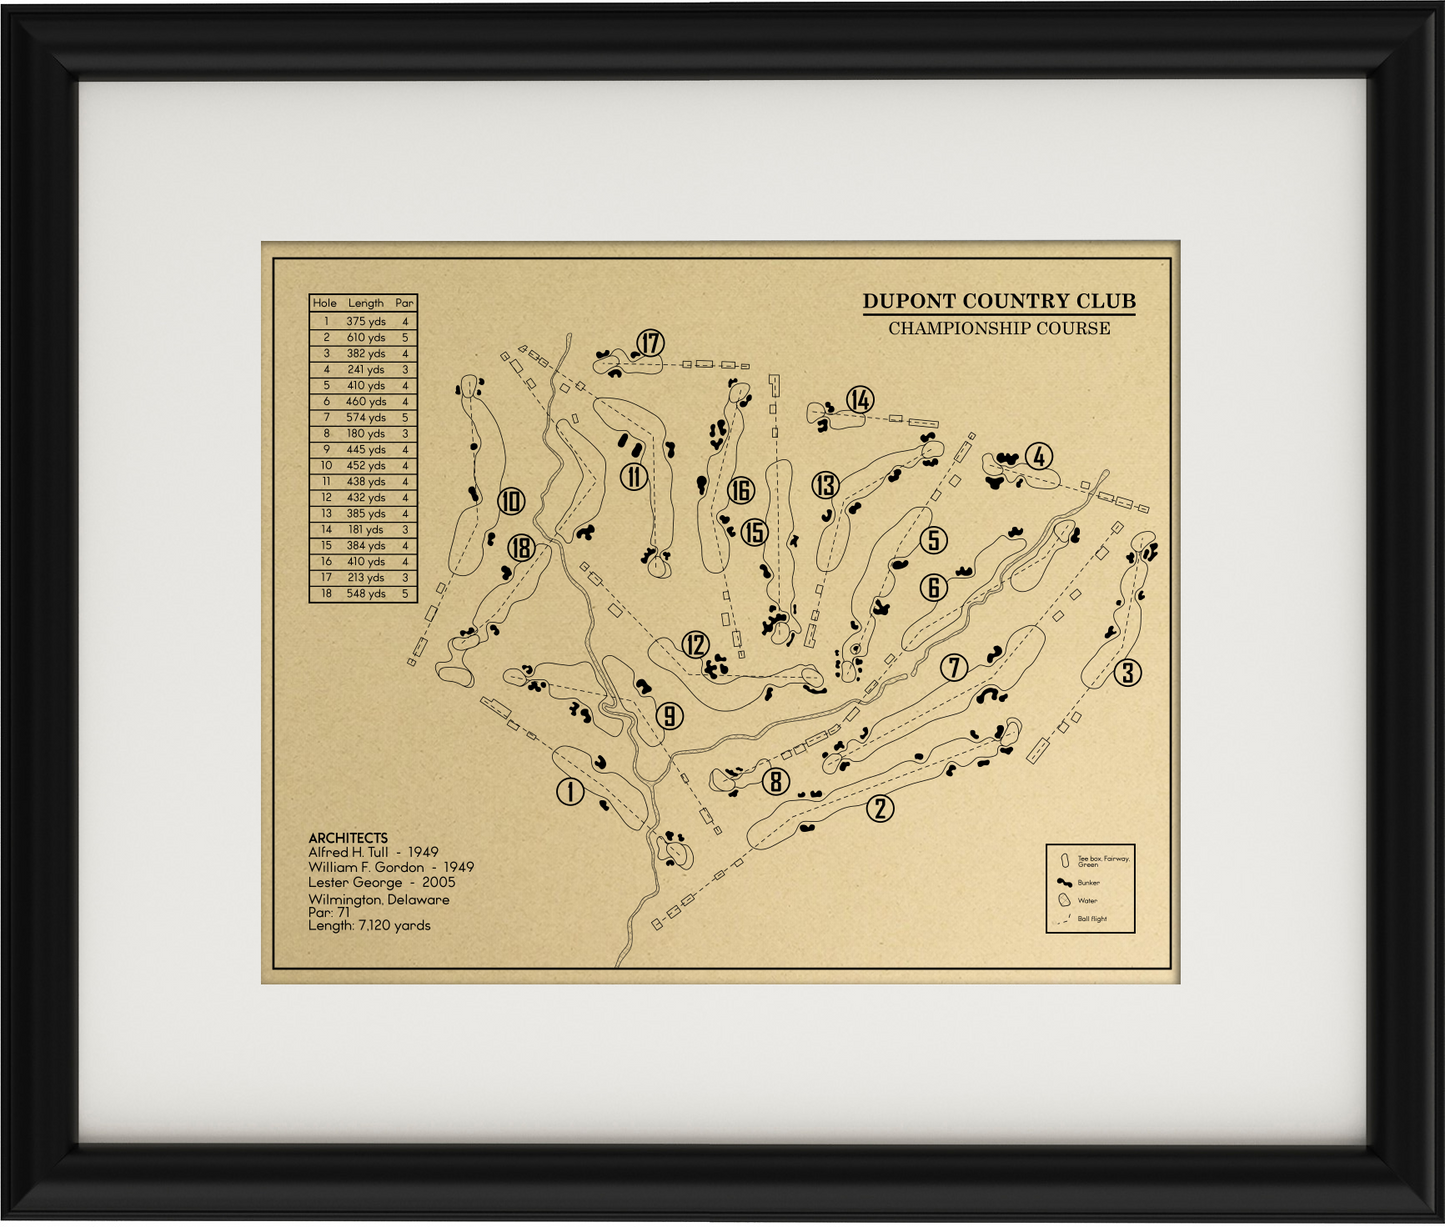 DuPont Country Club Championship Course Outline (Print)